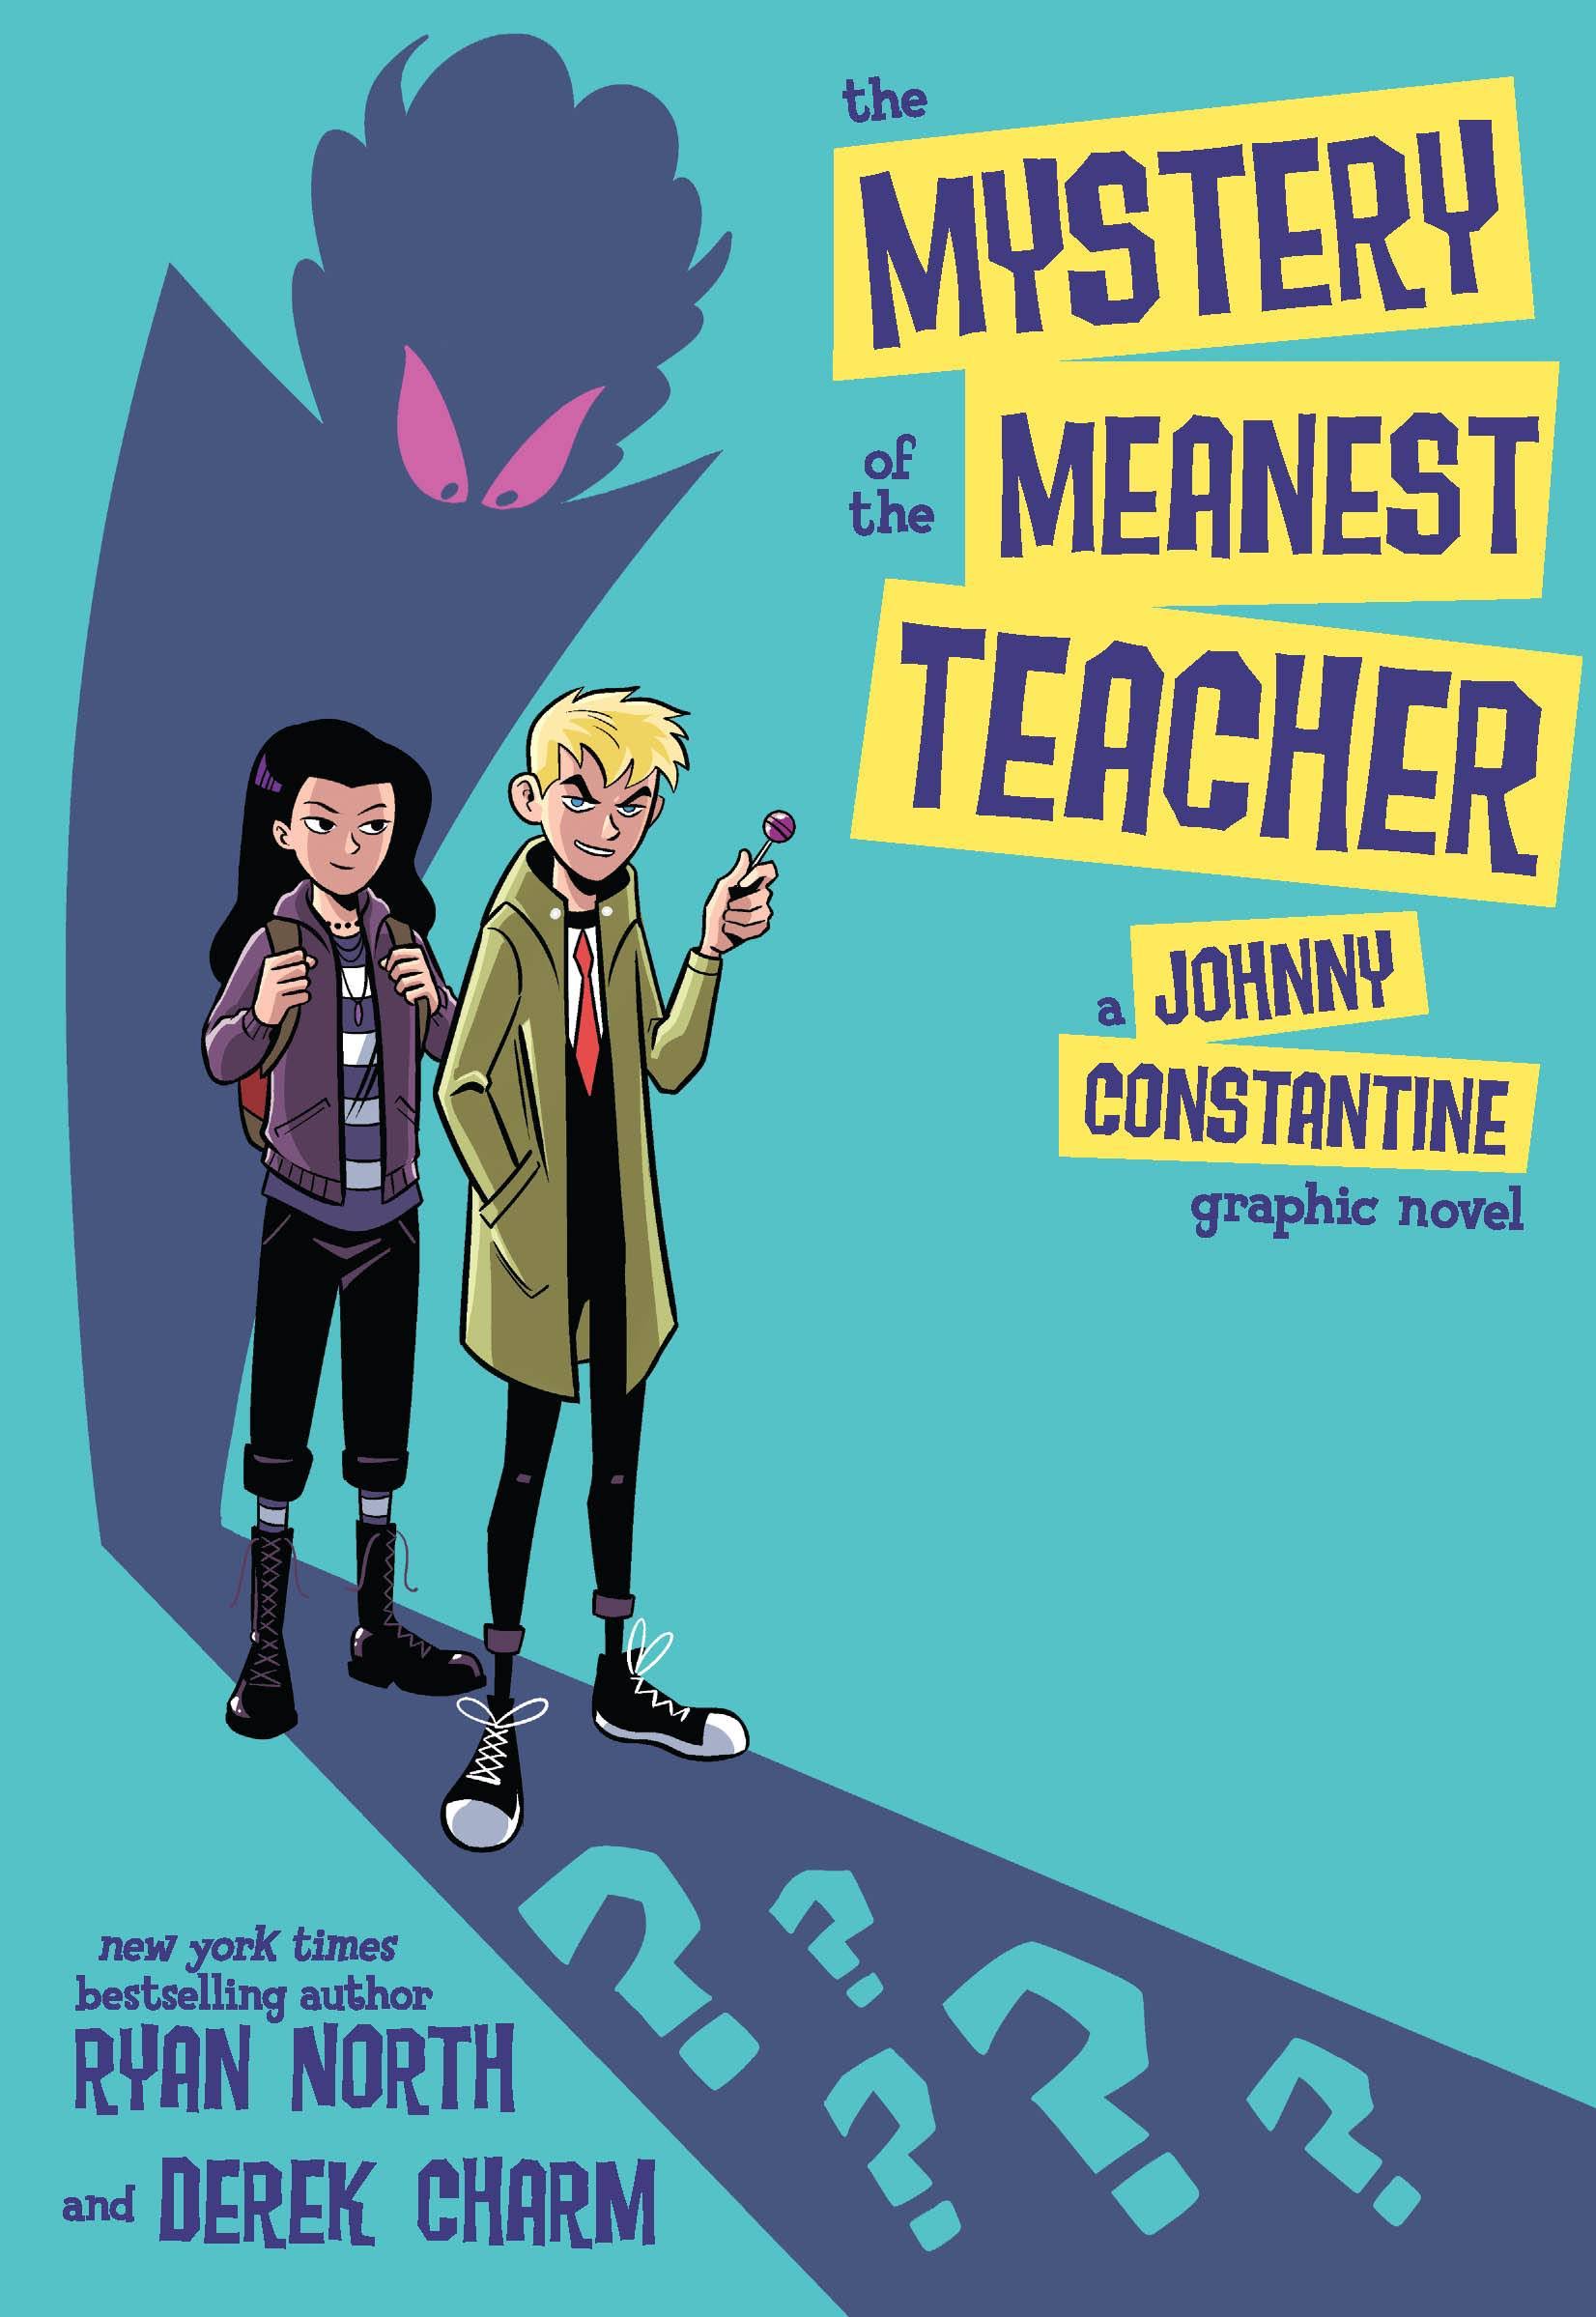 The Mystery of the Meanest Teacher: a Johnny Constantine Graphic Novel [Book]